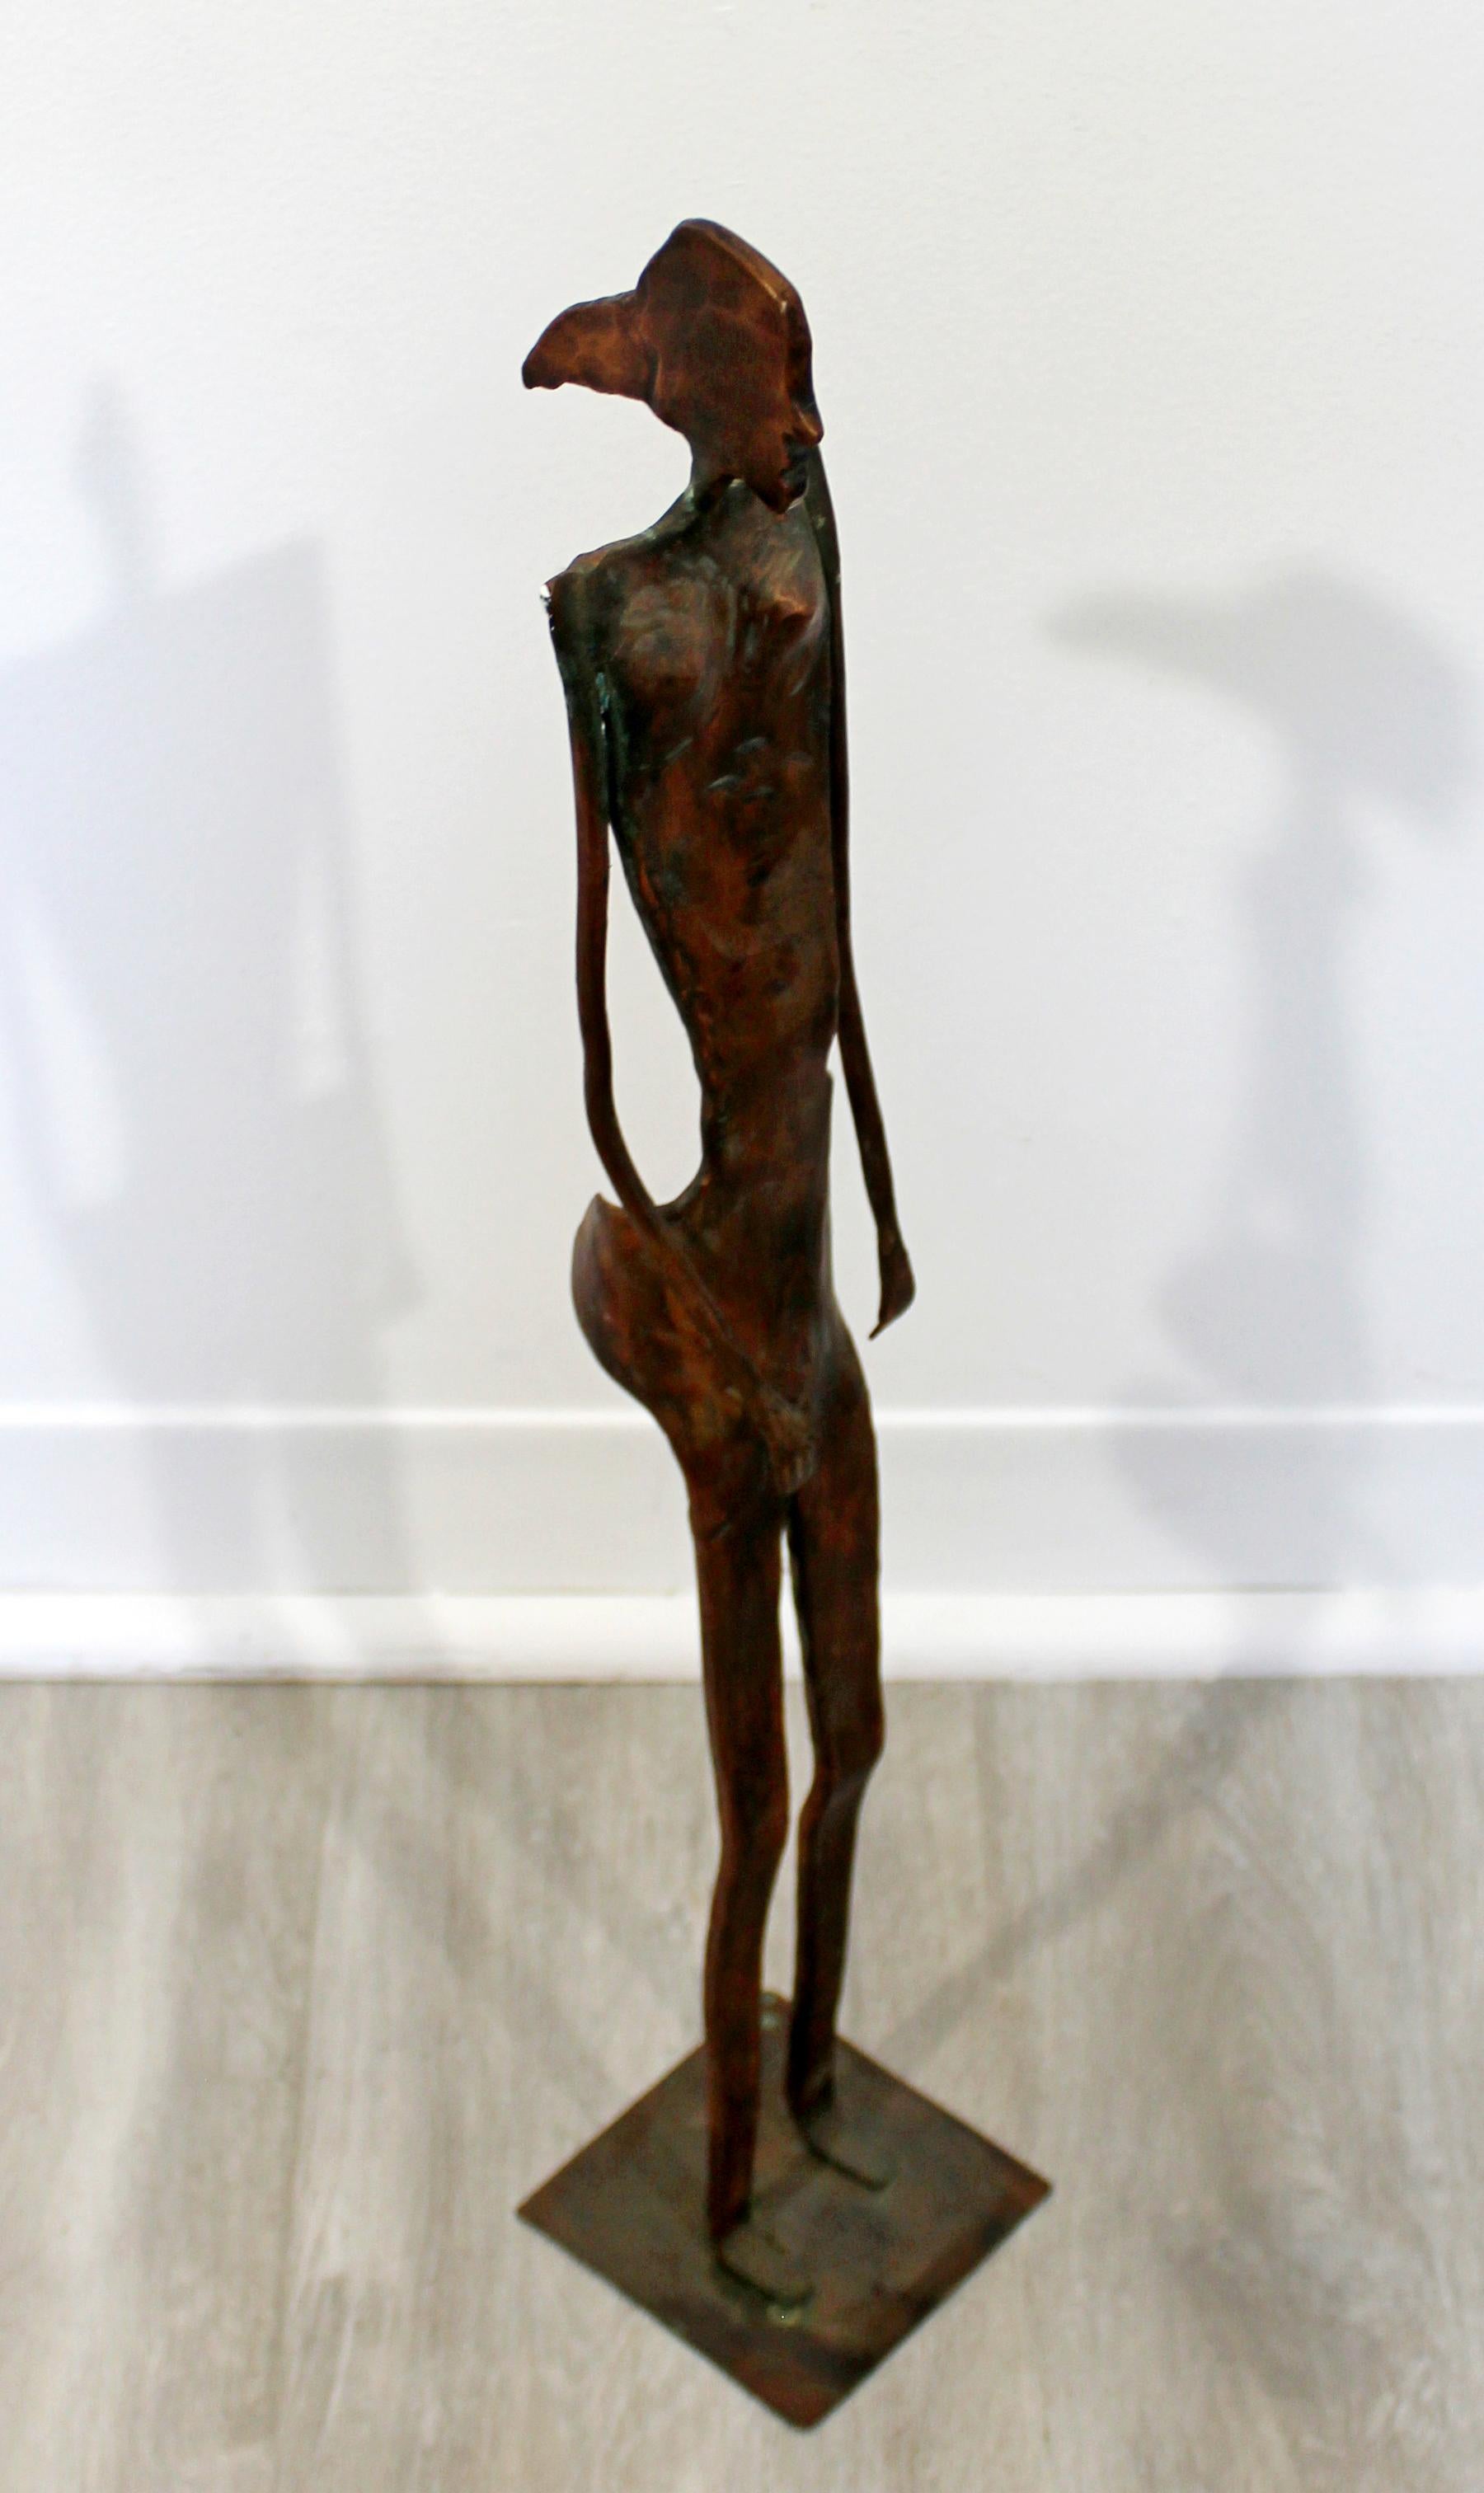 For your consideration is a stunning, forged copper metal table sculpture of a nude woman, signed by Robert D. Hansen, dated 2001. Reminiscent of Giacometti. In excellent condition. The dimensions are 4